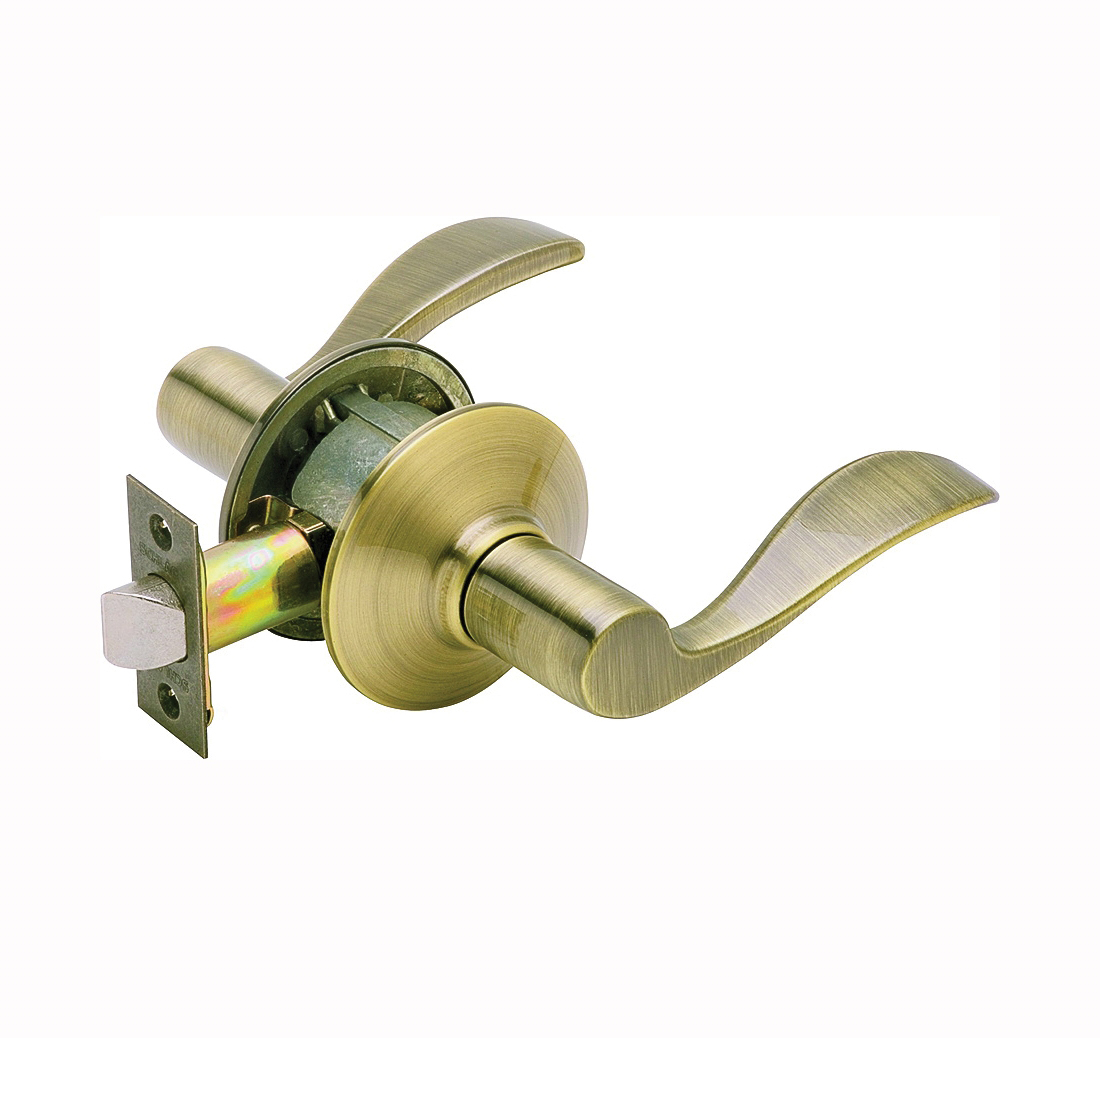 Accent Series F10 ACC 609 Passage Lever, Mechanical Lock, Antique Brass, Metal, Residential, 2 Grade